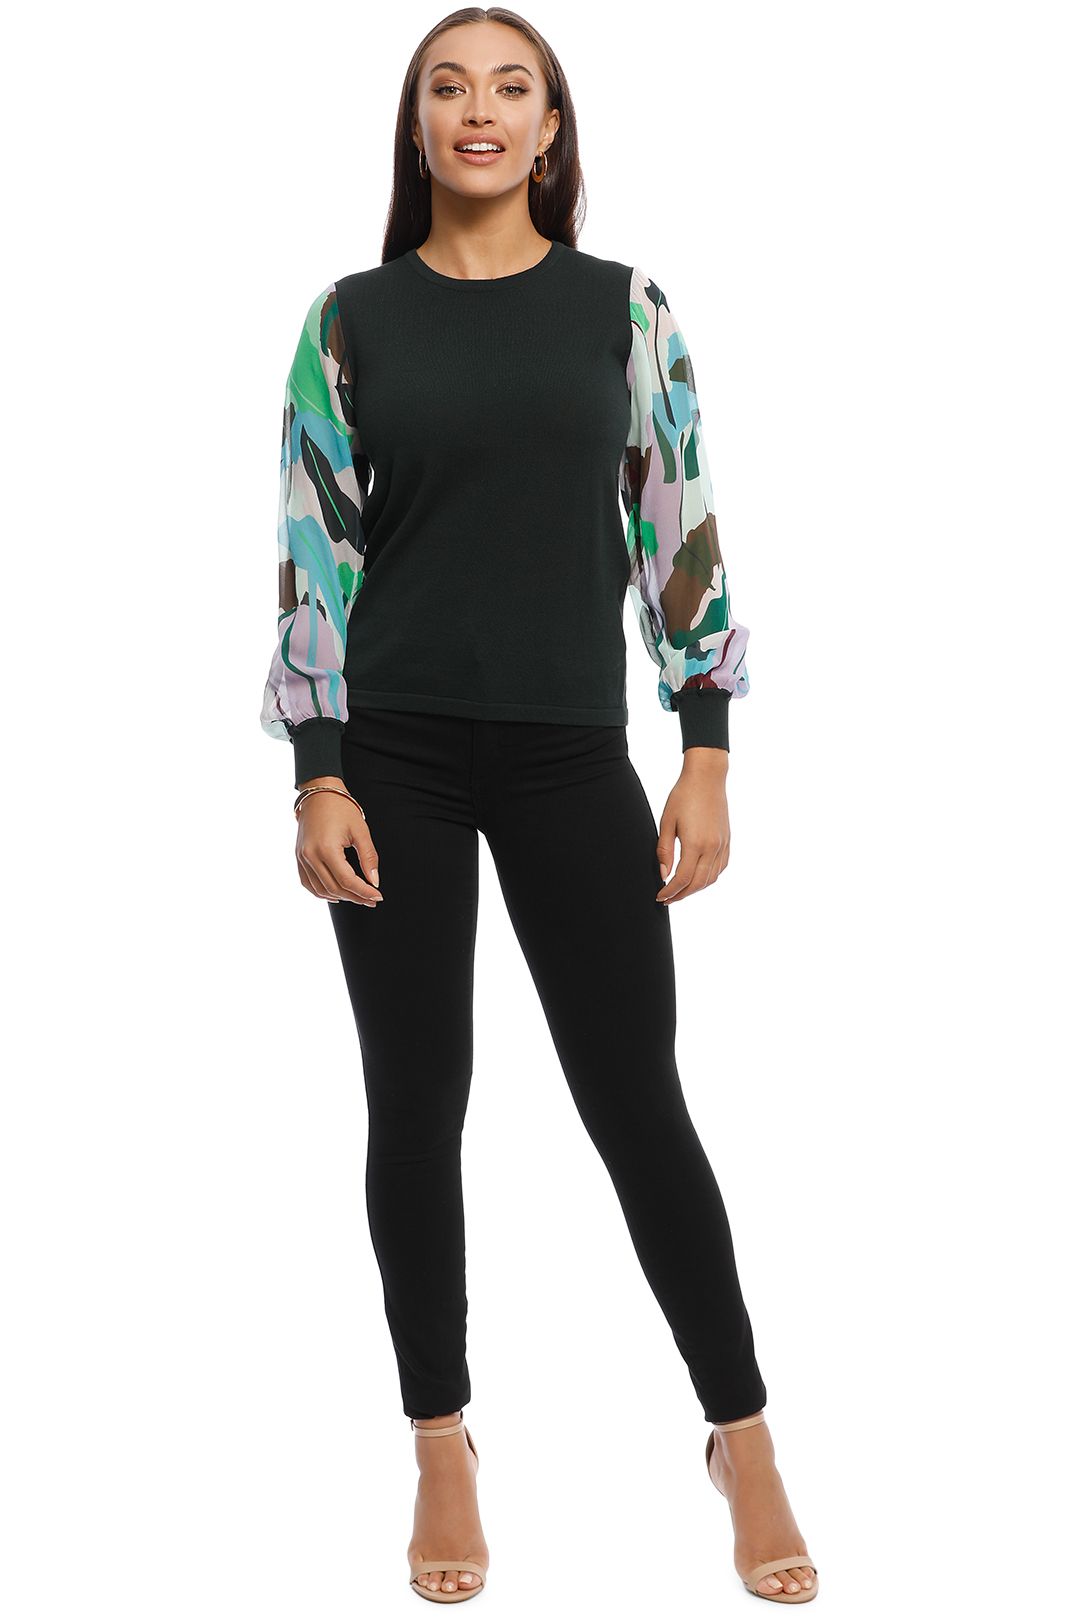 Gorman - Philodendron Knit Top - Black - Front